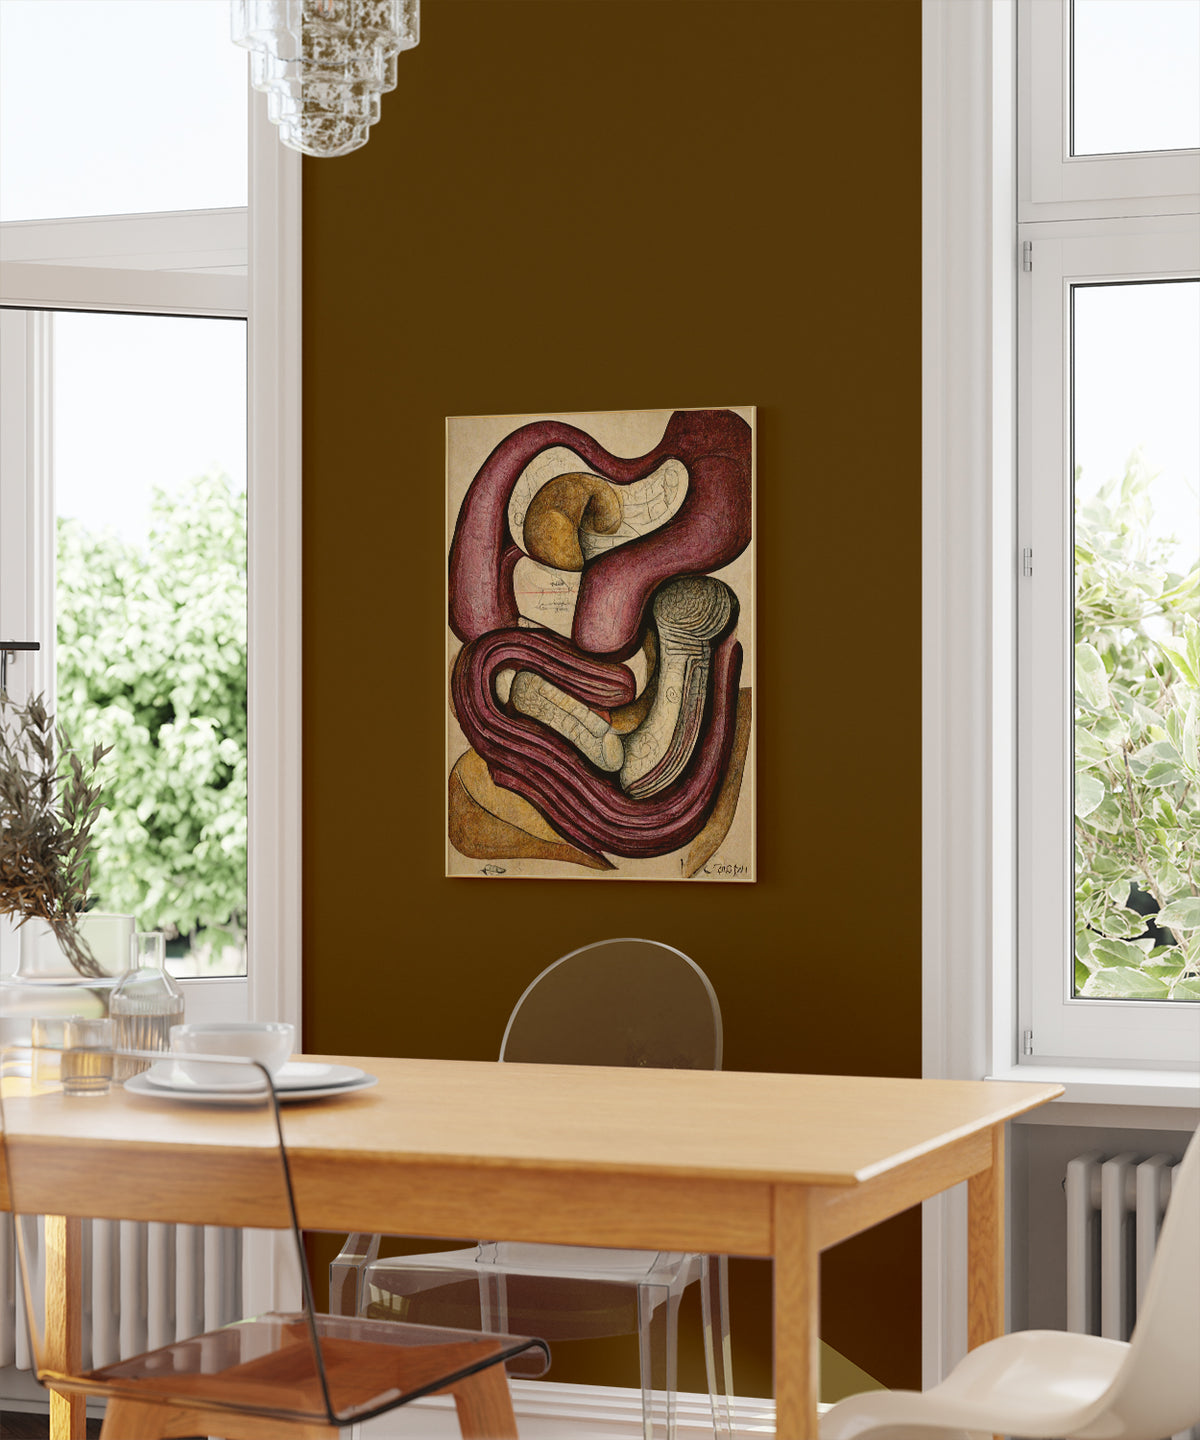 Intestines Anatomy Art Print - A visually striking representation of digestive anatomy, ideal for gastroenterologist clinic decoration and creating a professional atmosphere.